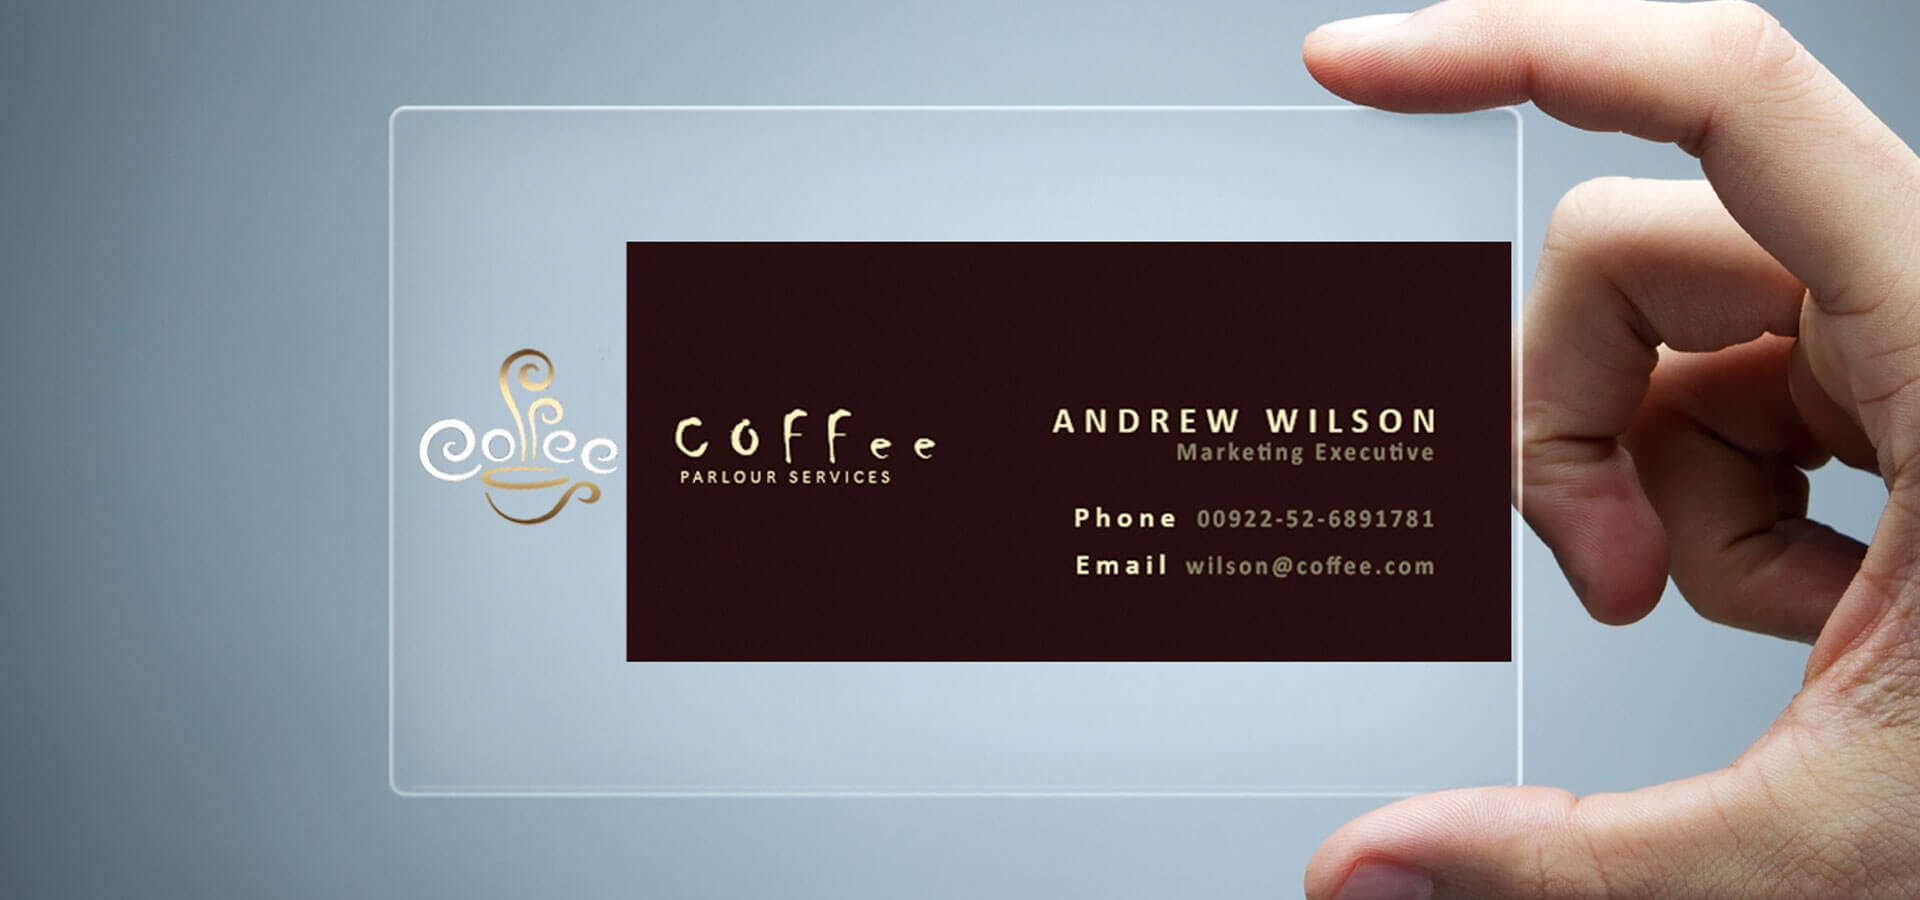 26+ Transparent Business Card Templates - Illustrator, Ms Within Microsoft Office Business Card Template